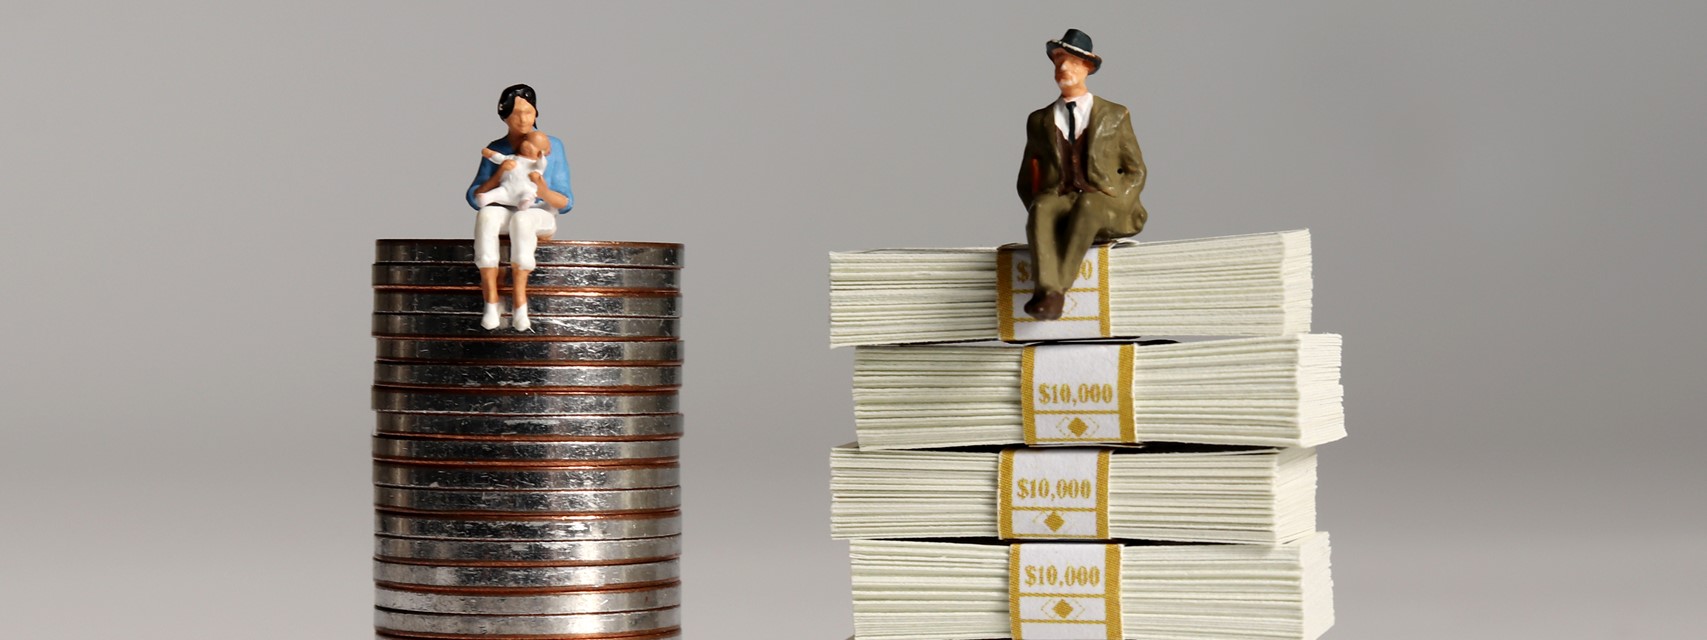 A woman with a baby sitting on a pile of coins and a man in a suit sitting on a pile of $10,000 packets of bills.